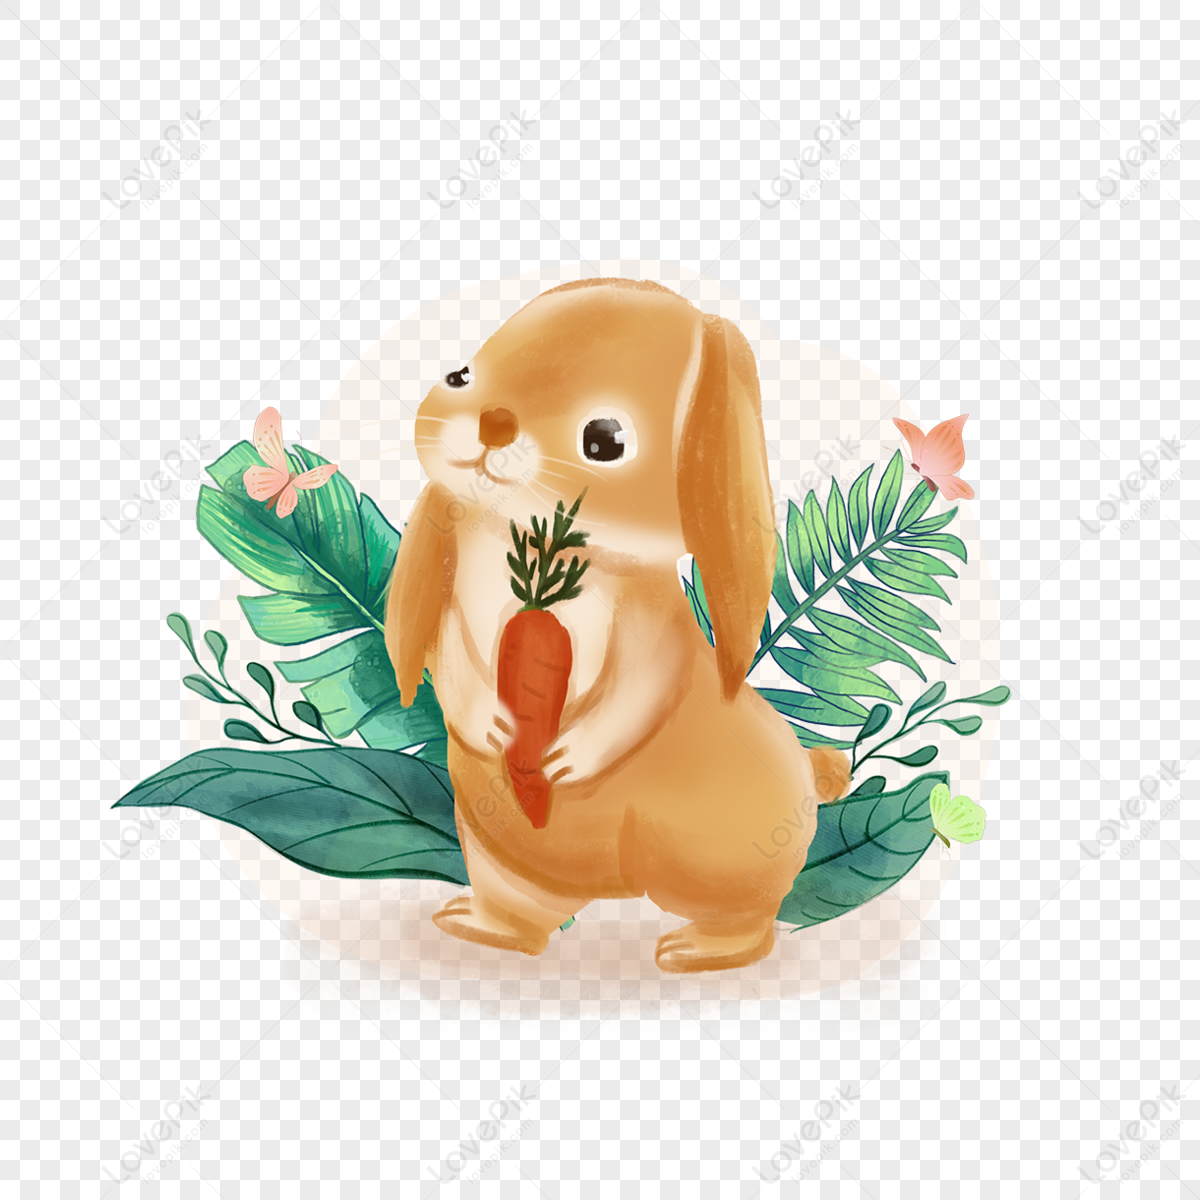 Summer animal bunny clipart,summer animals,plant,cartoon png white transparent